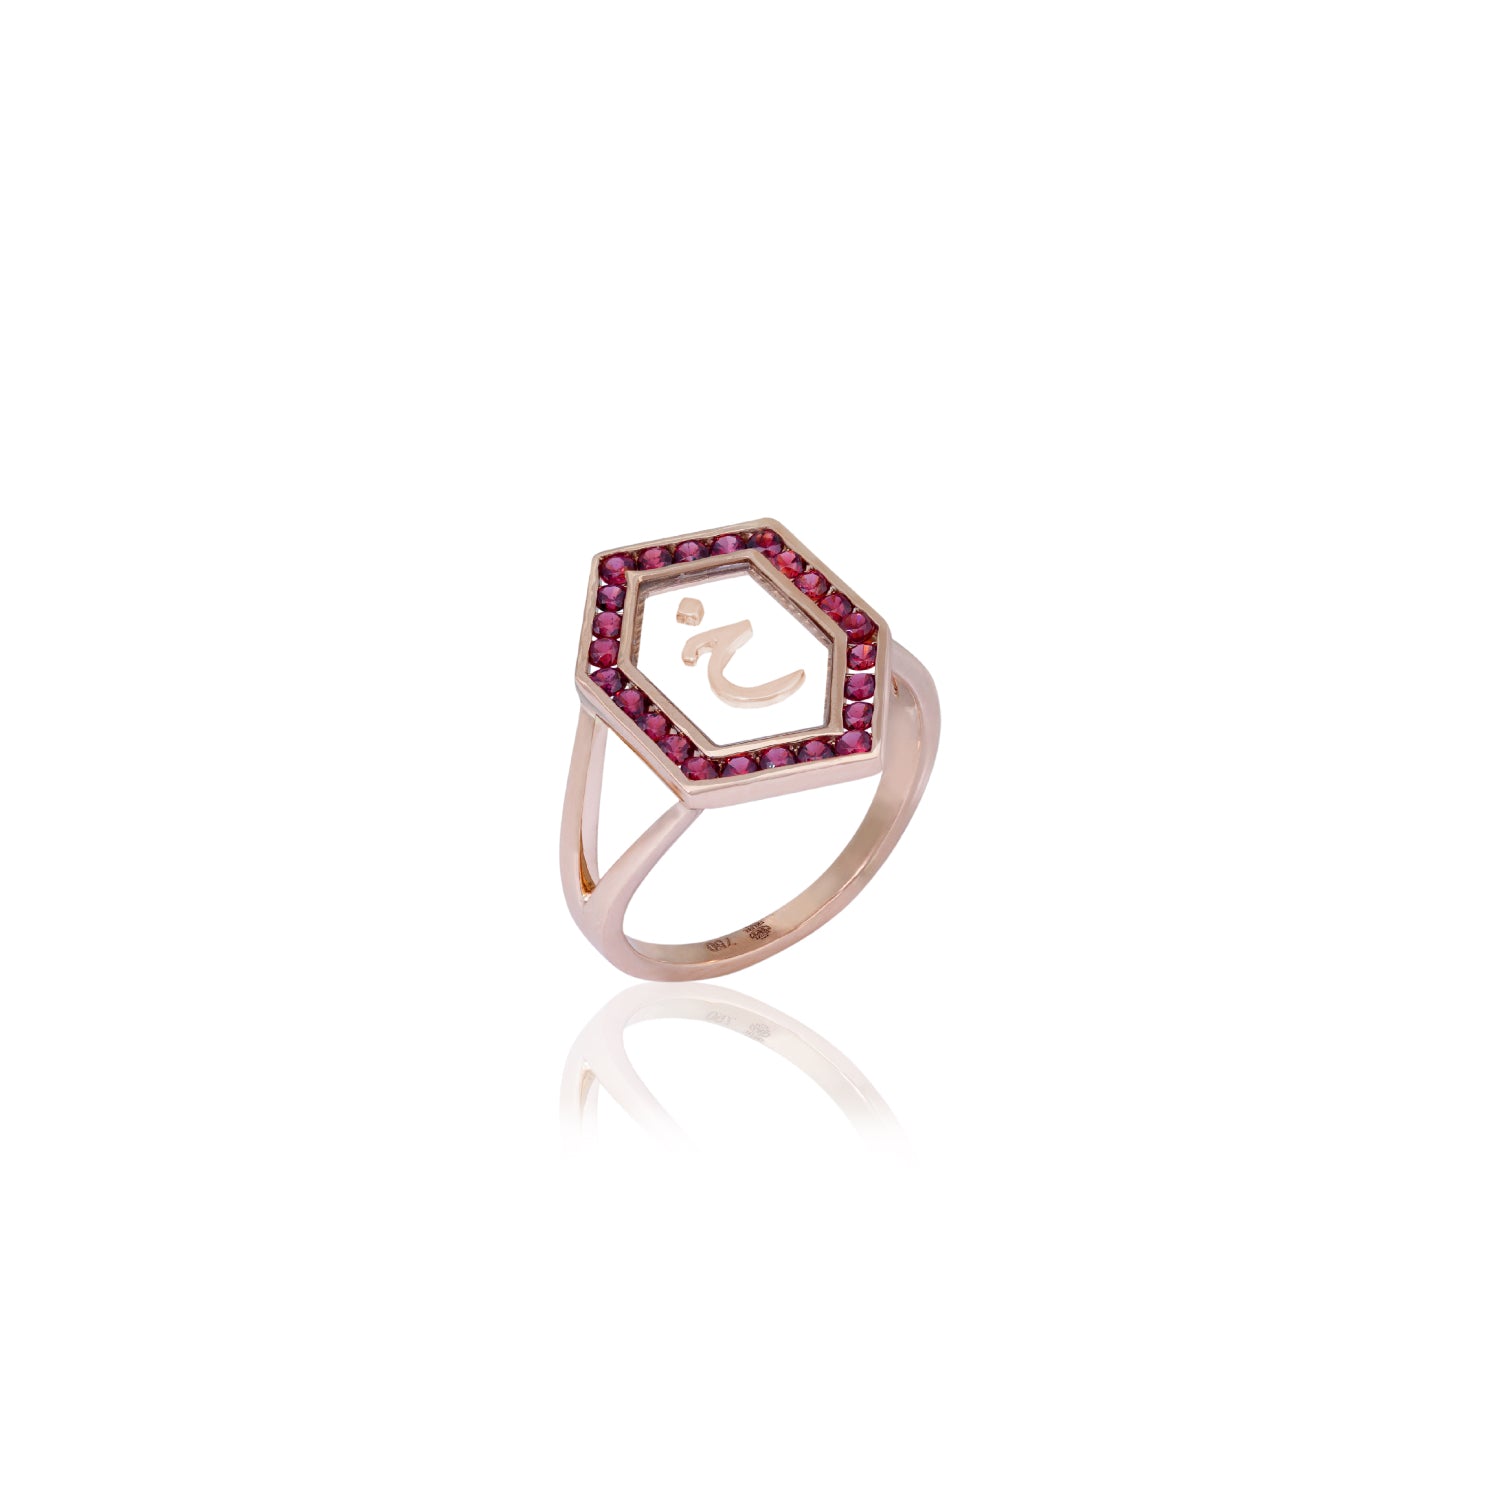 Qamoos 1.0 Letter خ Ruby Ring in Rose Gold